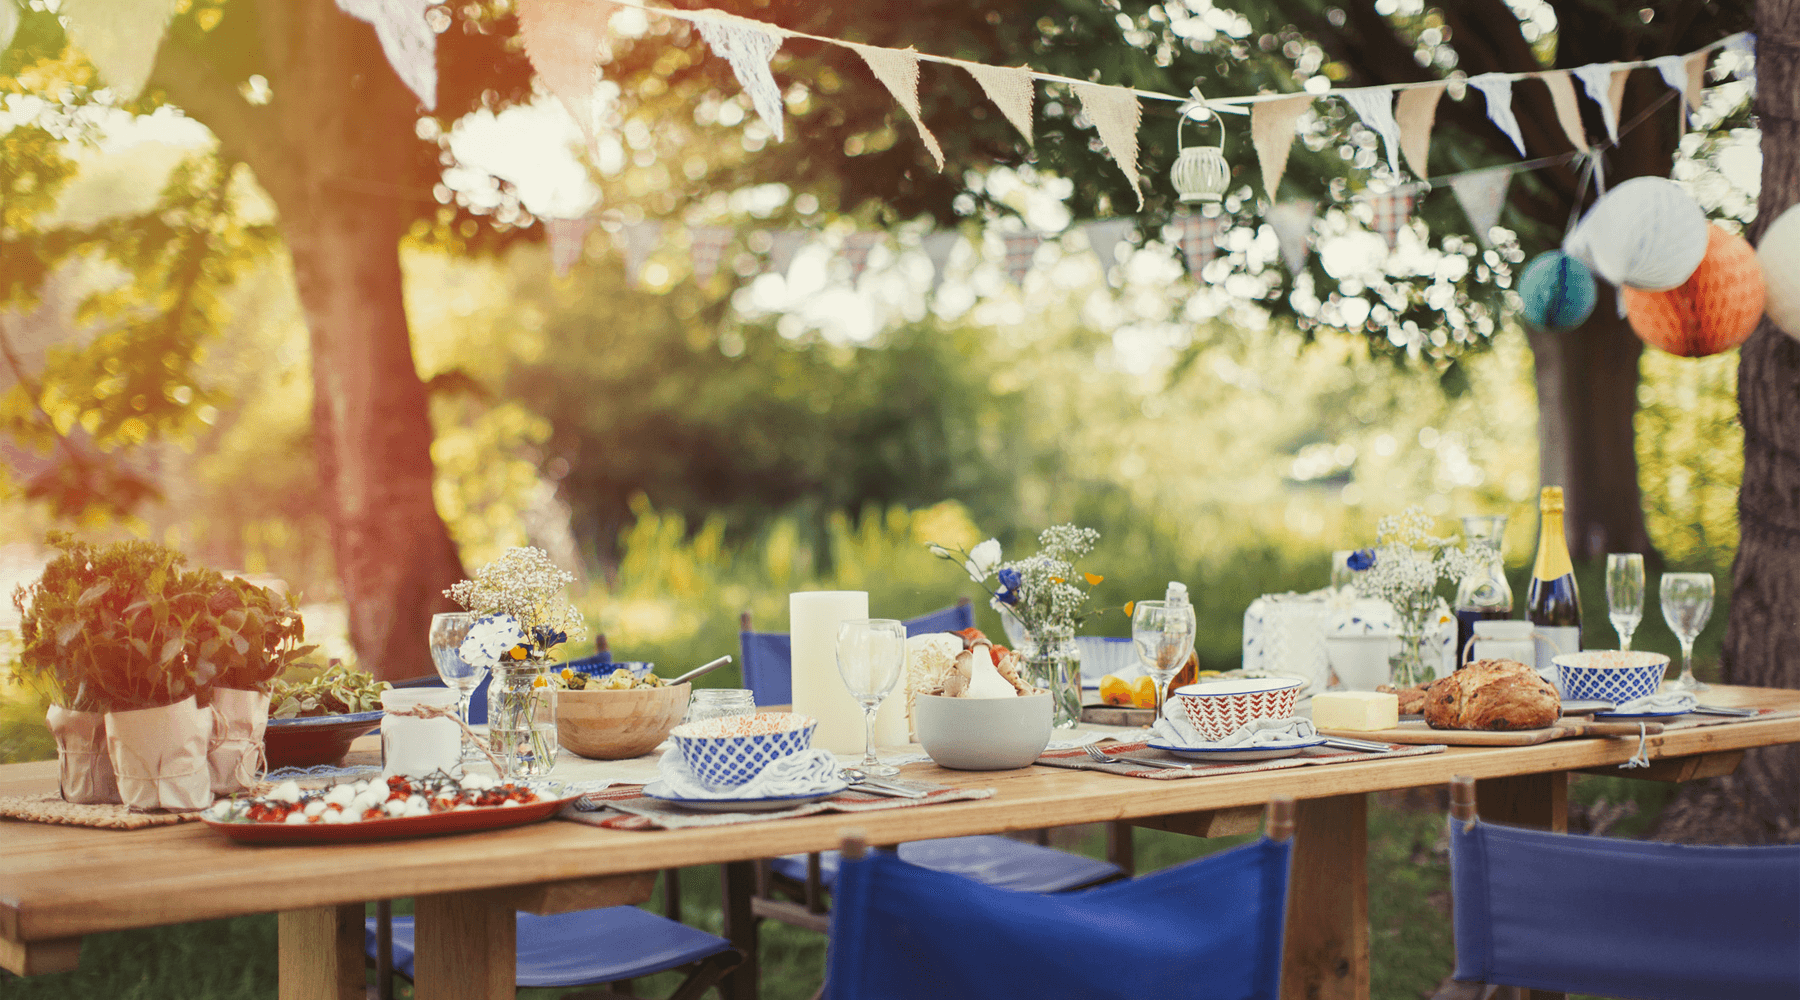 Tips to Host the Perfect Small Garden Party